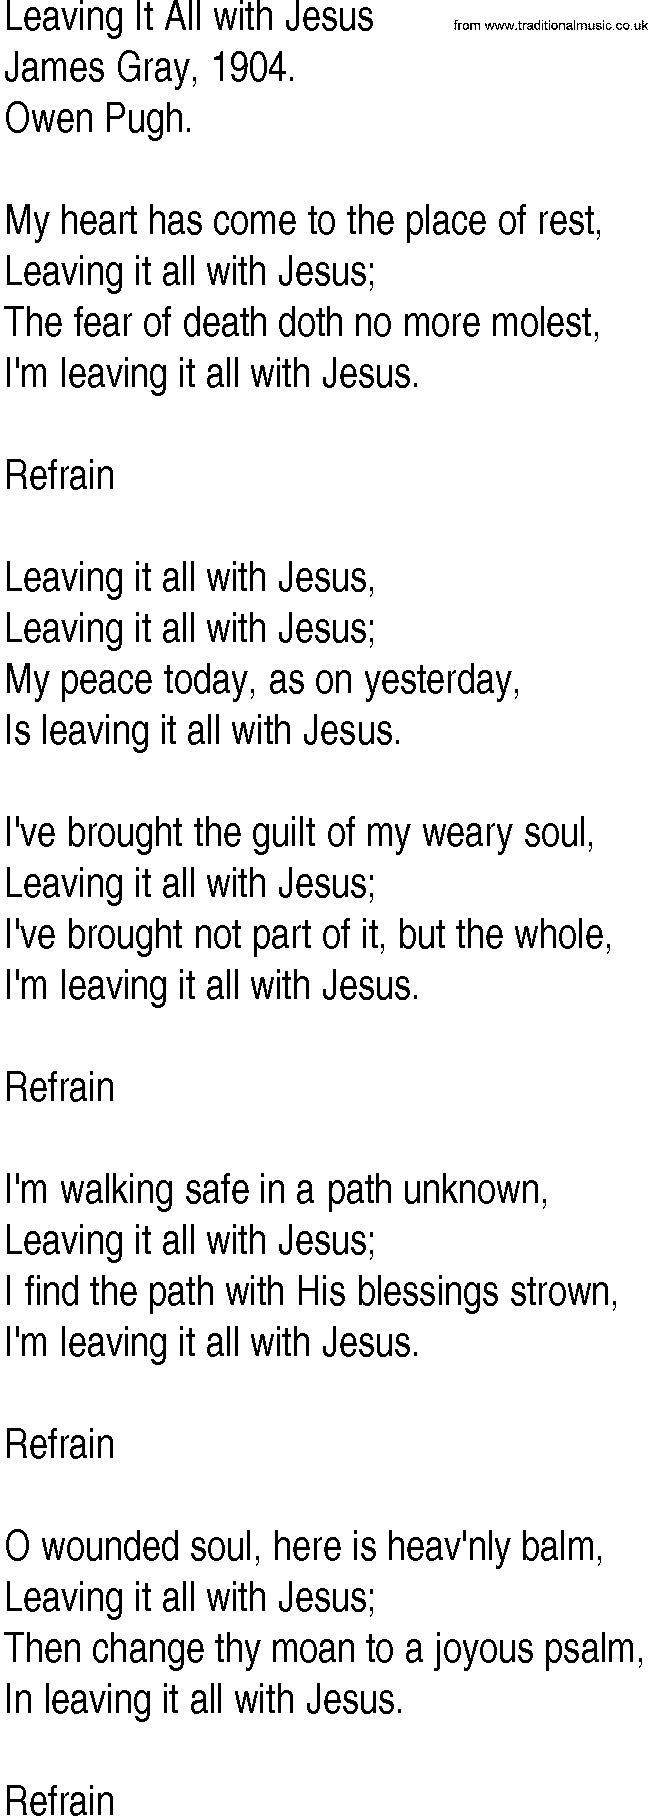 Hymn and Gospel Song: Leaving It All with Jesus by James Gray lyrics